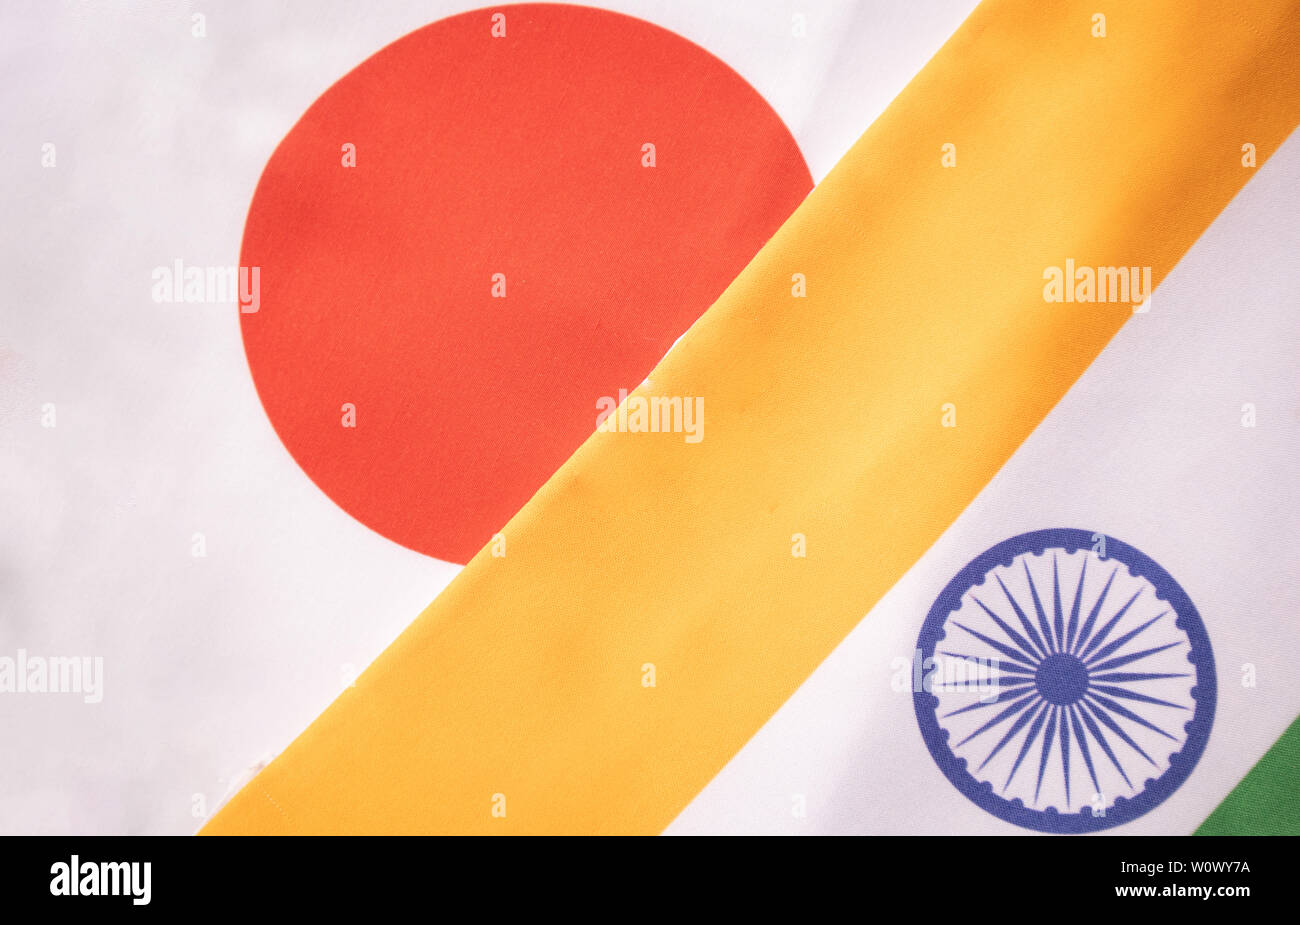 Concept of Bilateral relationship between two countries showing with two flags: India and Japan. Stock Photo